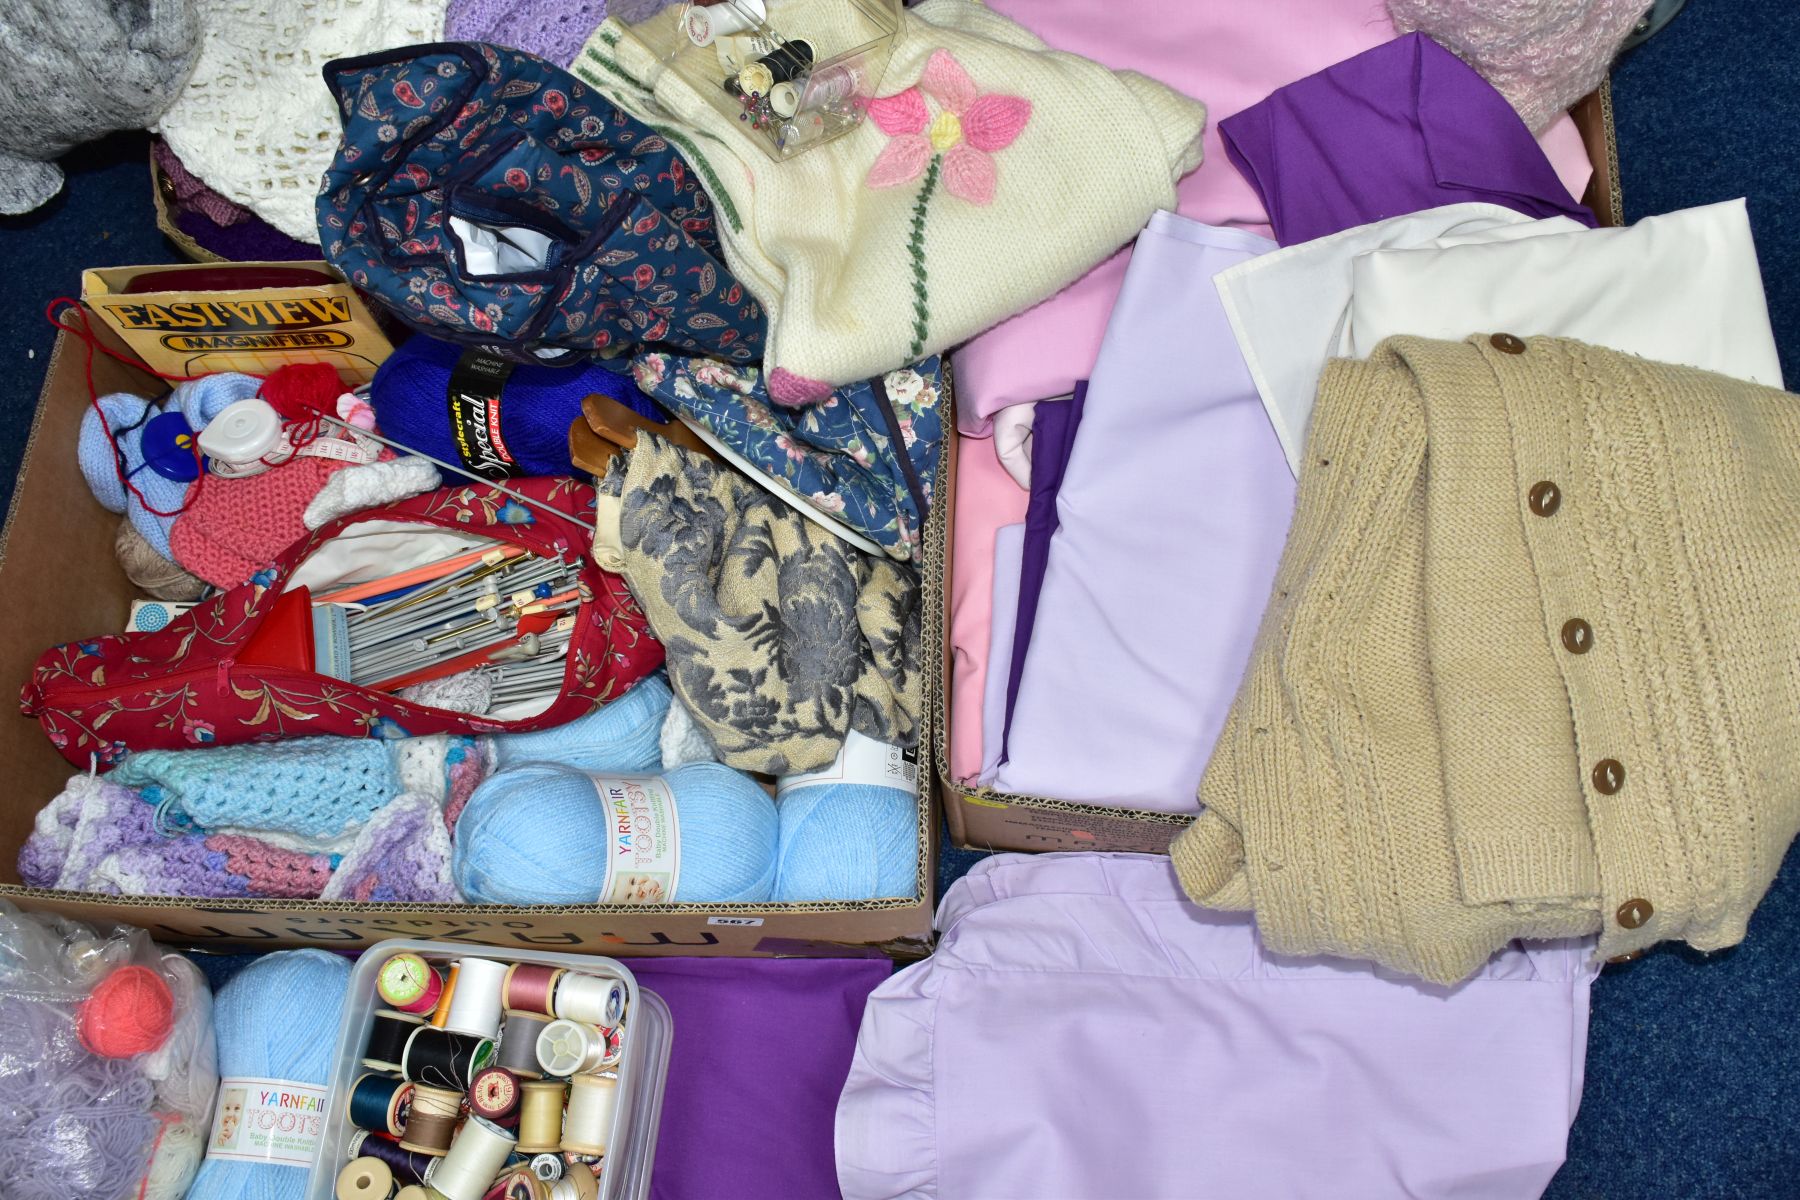 FIVE BOXES OF WOOL, KNITTING NEEDLES, BEDDING AND KNITWARE, the knitware looks to be homemade, the - Image 2 of 3